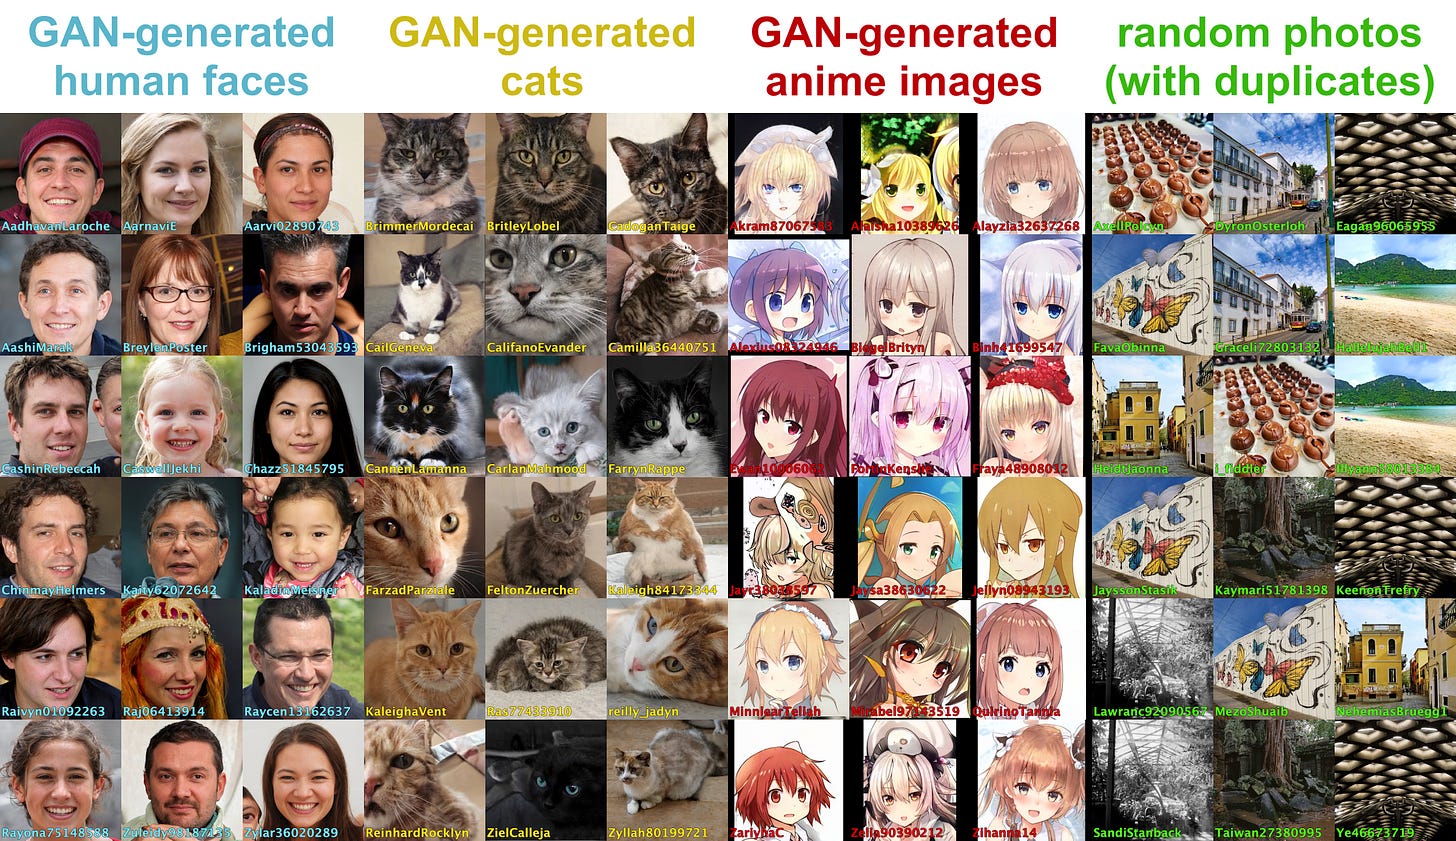 collage showing images of each type: GAN-generated faces, GAN-generated cats, GAN-generated anime images, random photos